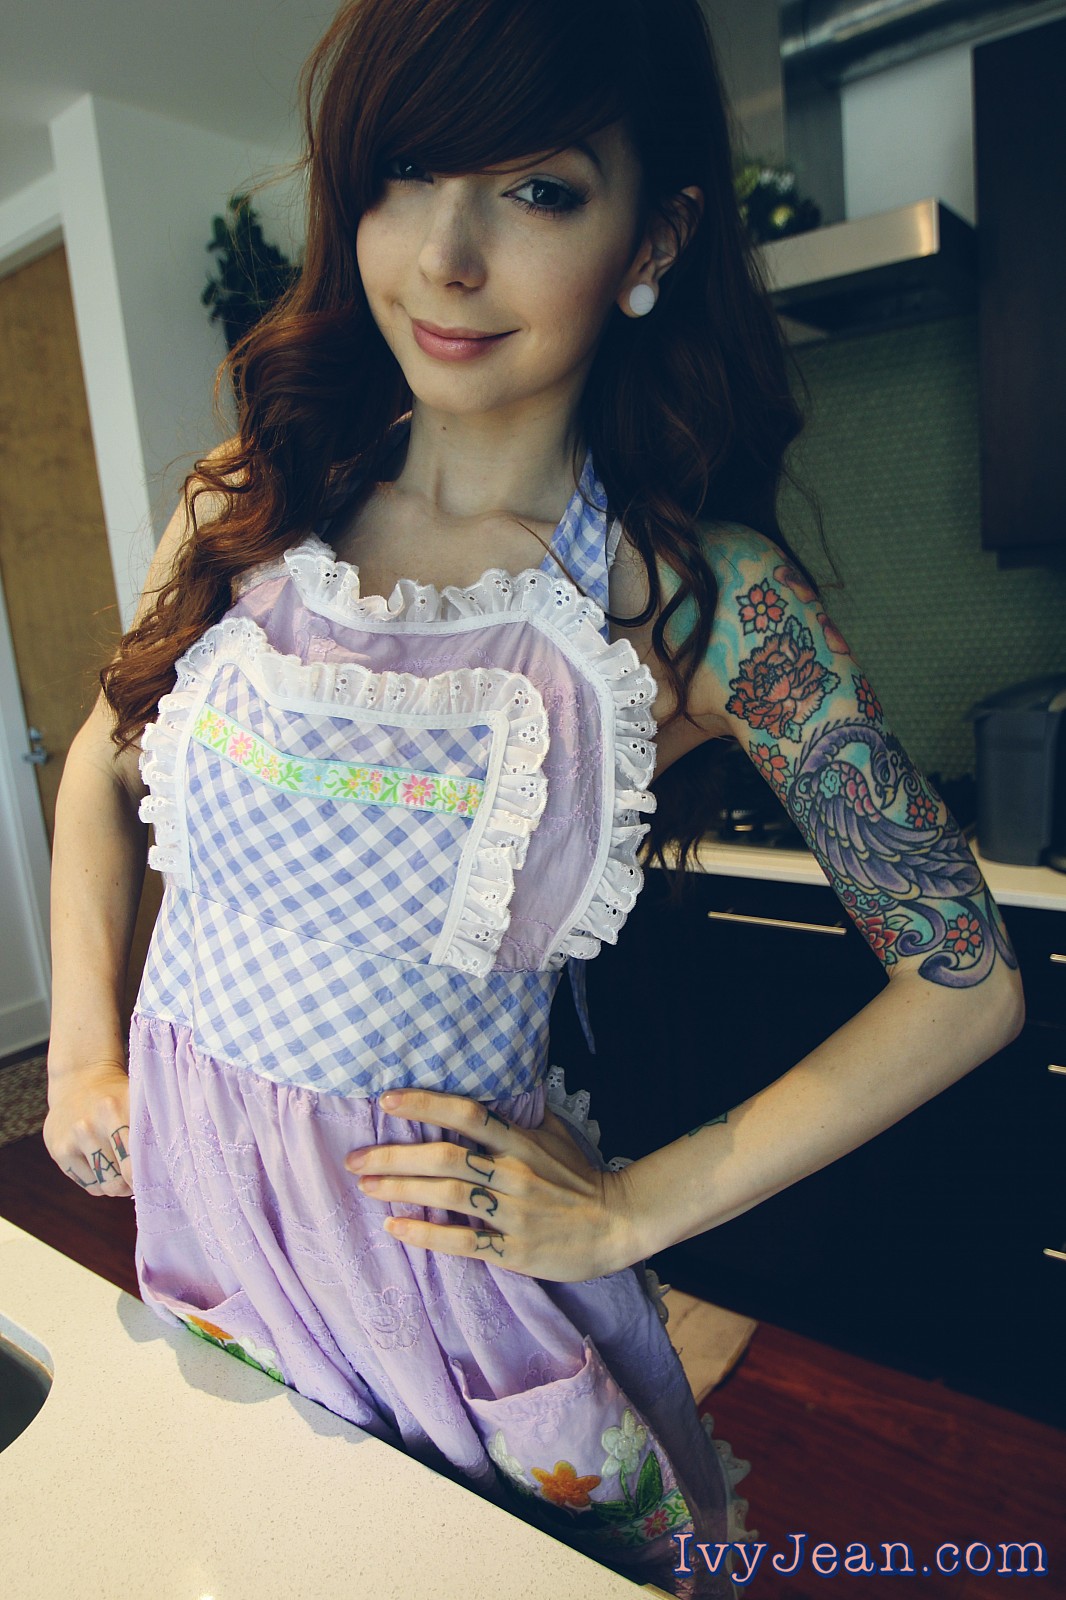 Tattooed Housewife Babe Ivy jean